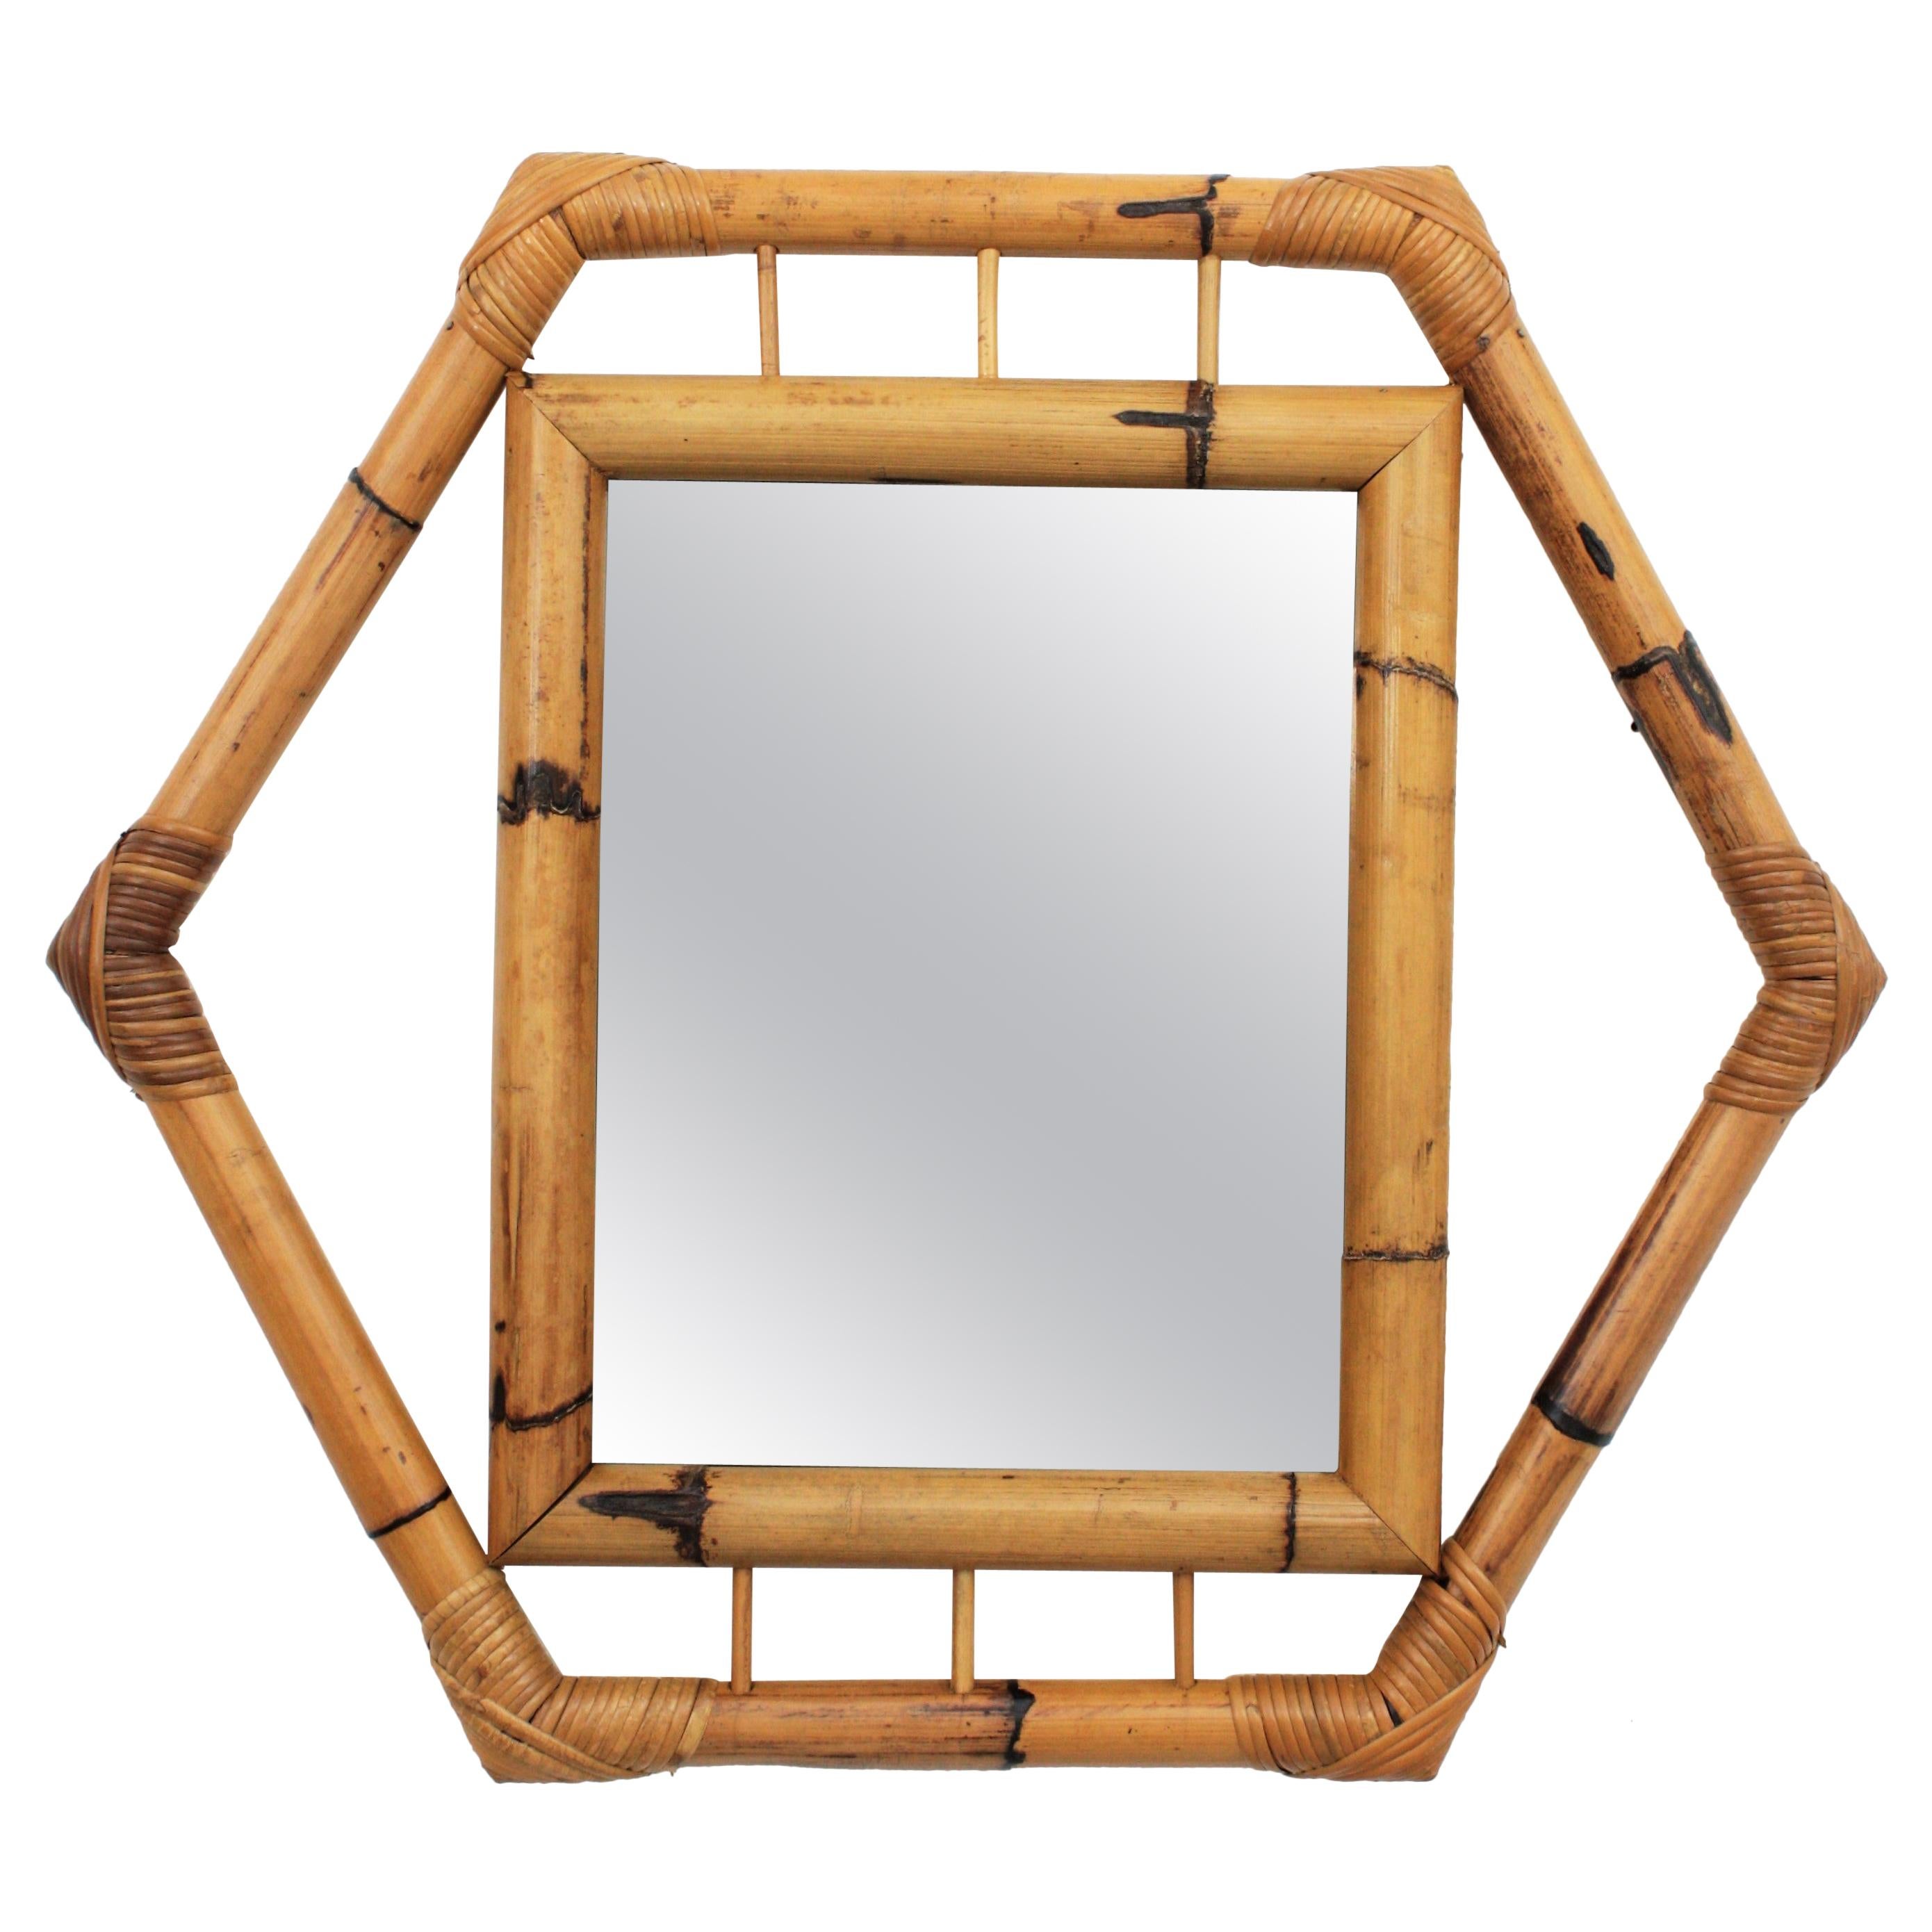 Bamboo Hexagonal Mirror with Smoked Glass, France, 1950s For Sale 3